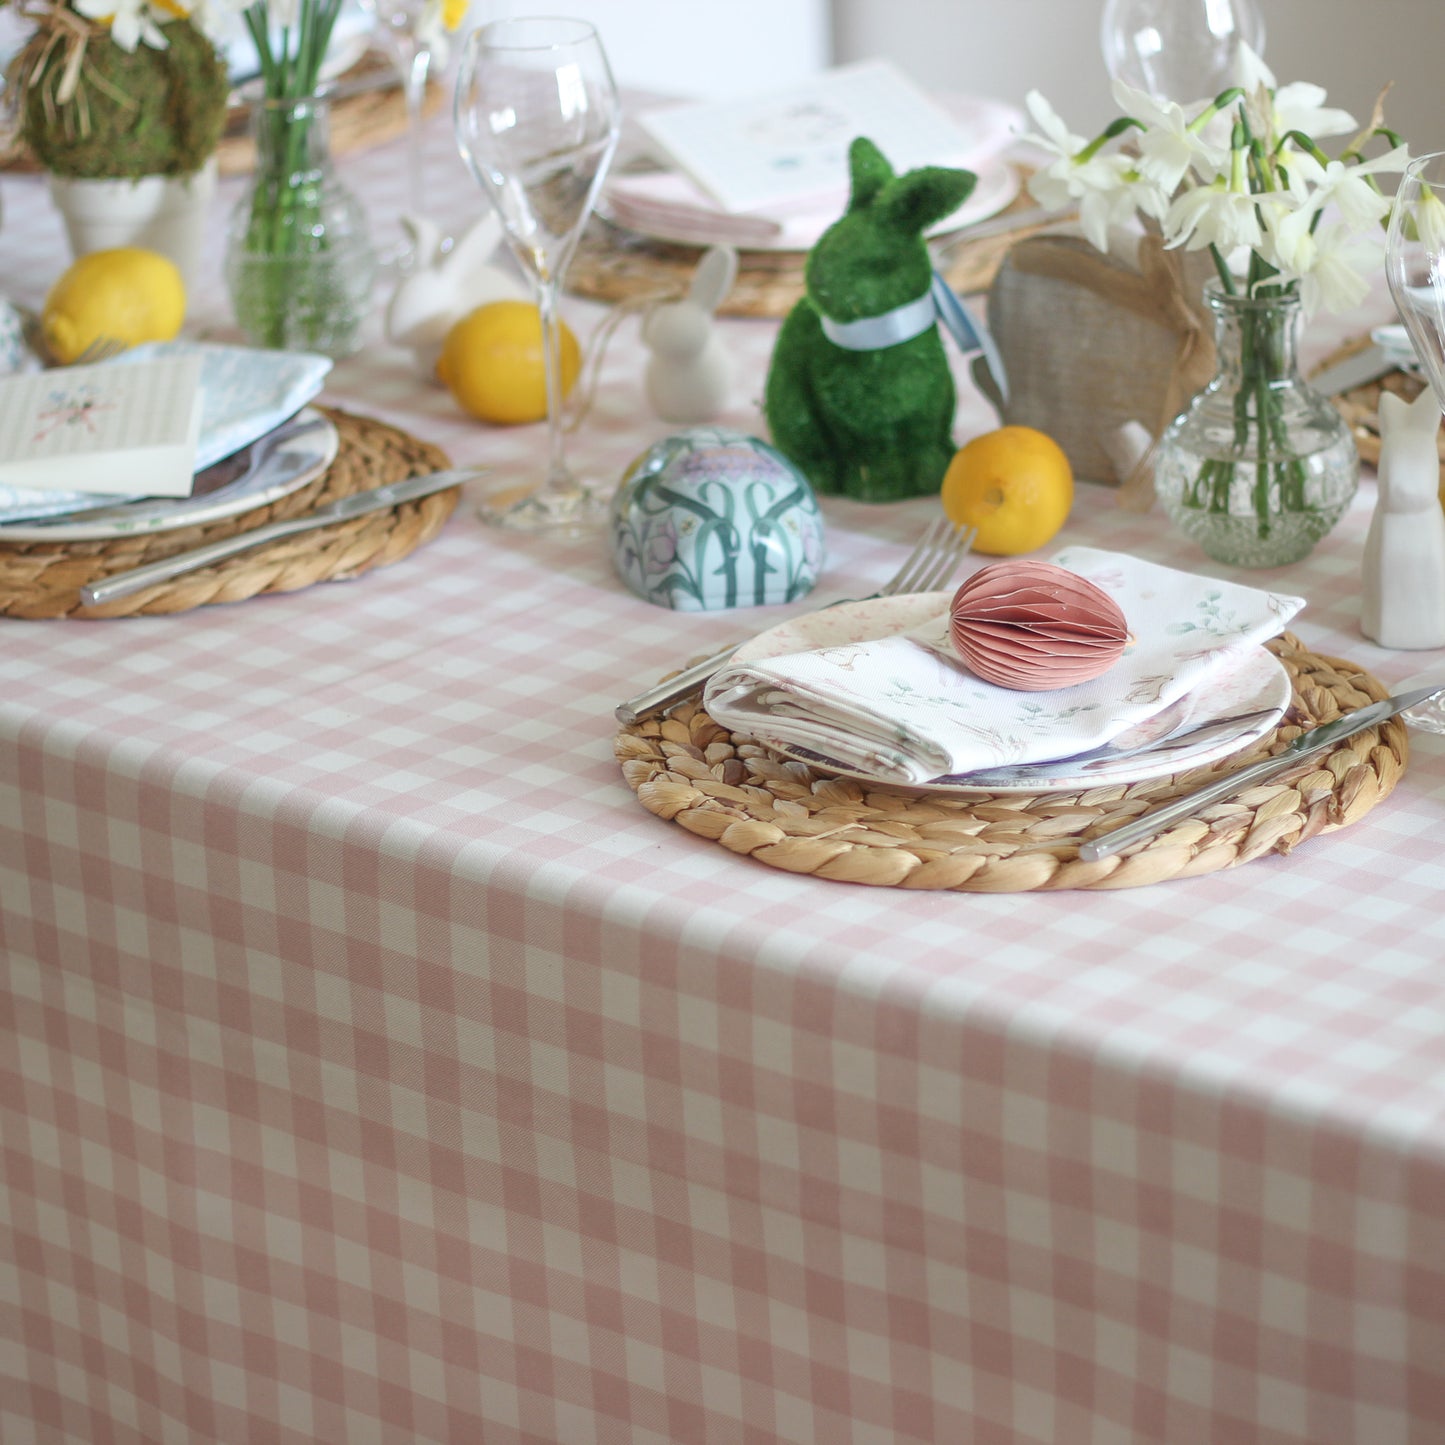 Pink Gingham Tablecloth